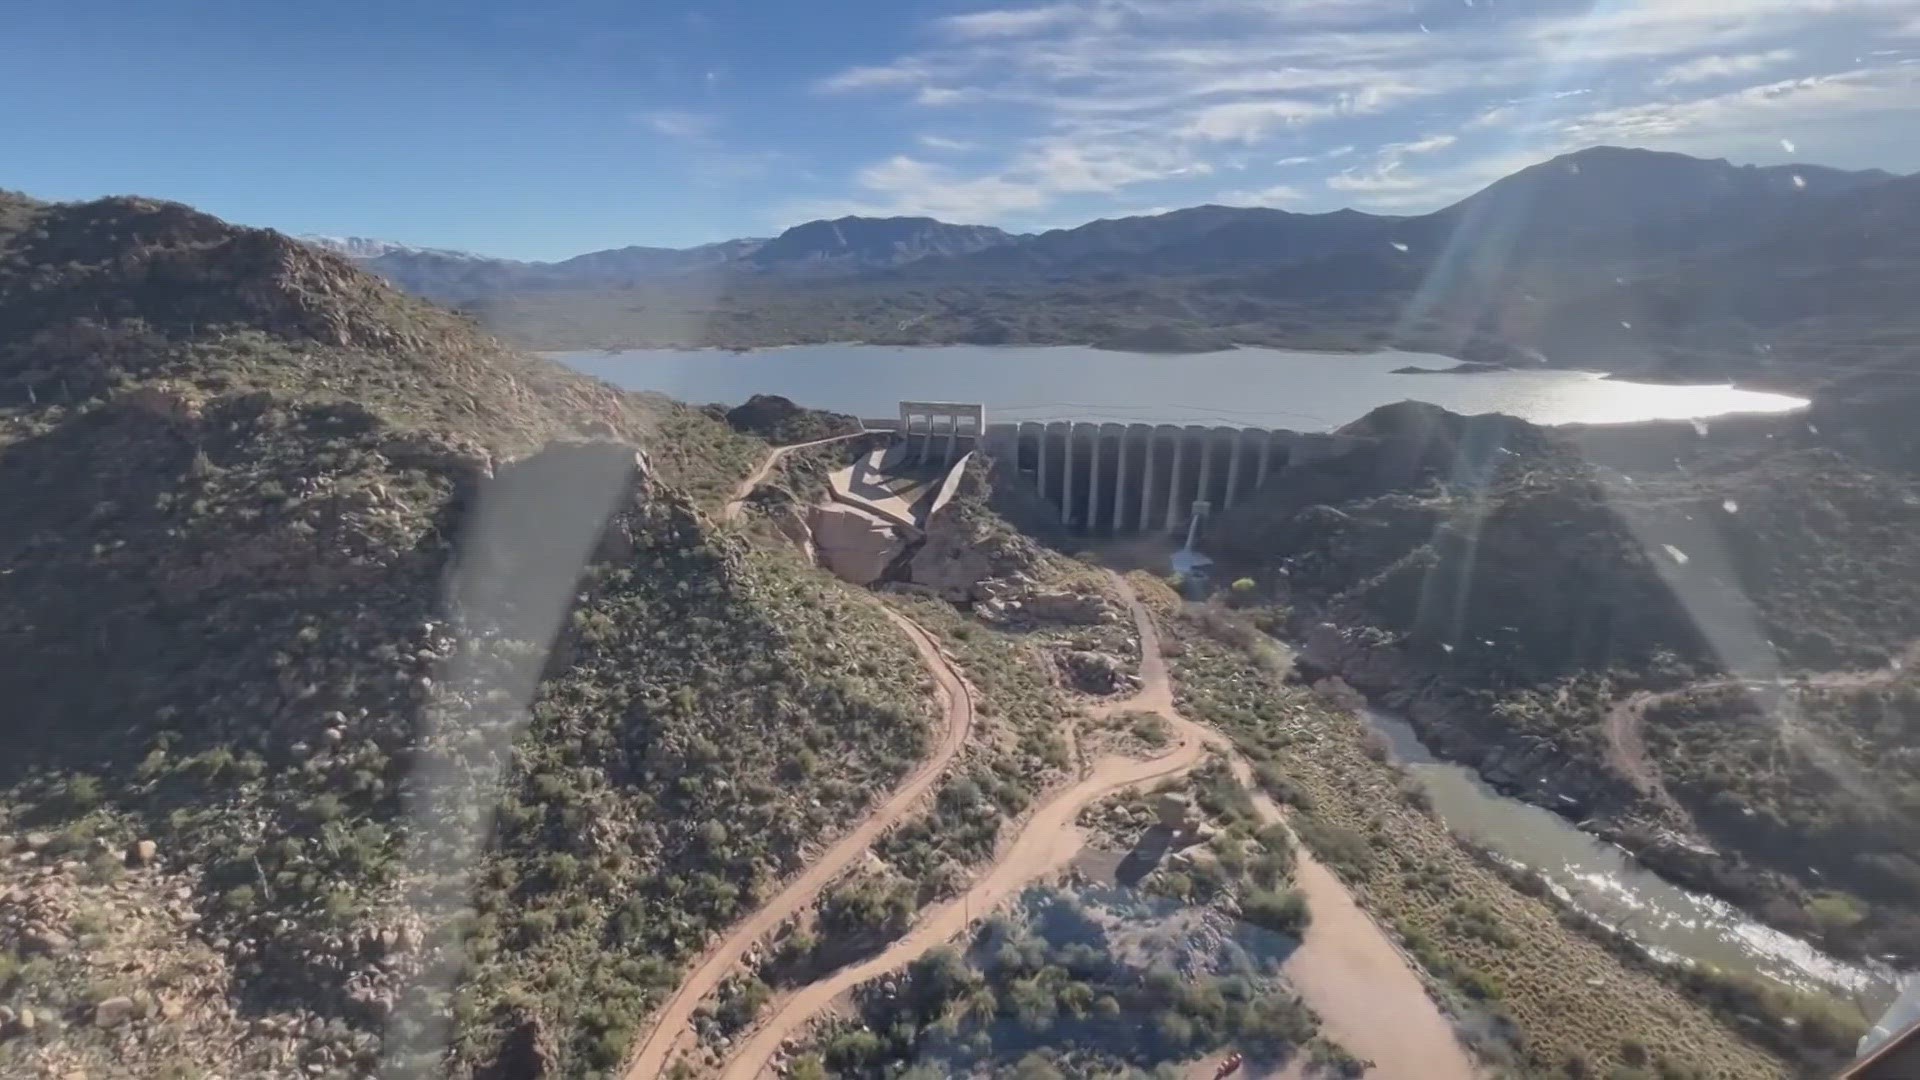 Experts say Arizona could experience a wetter-than-normal winter this year. Here's how SRP is preparing their systems for the extra water possibility.